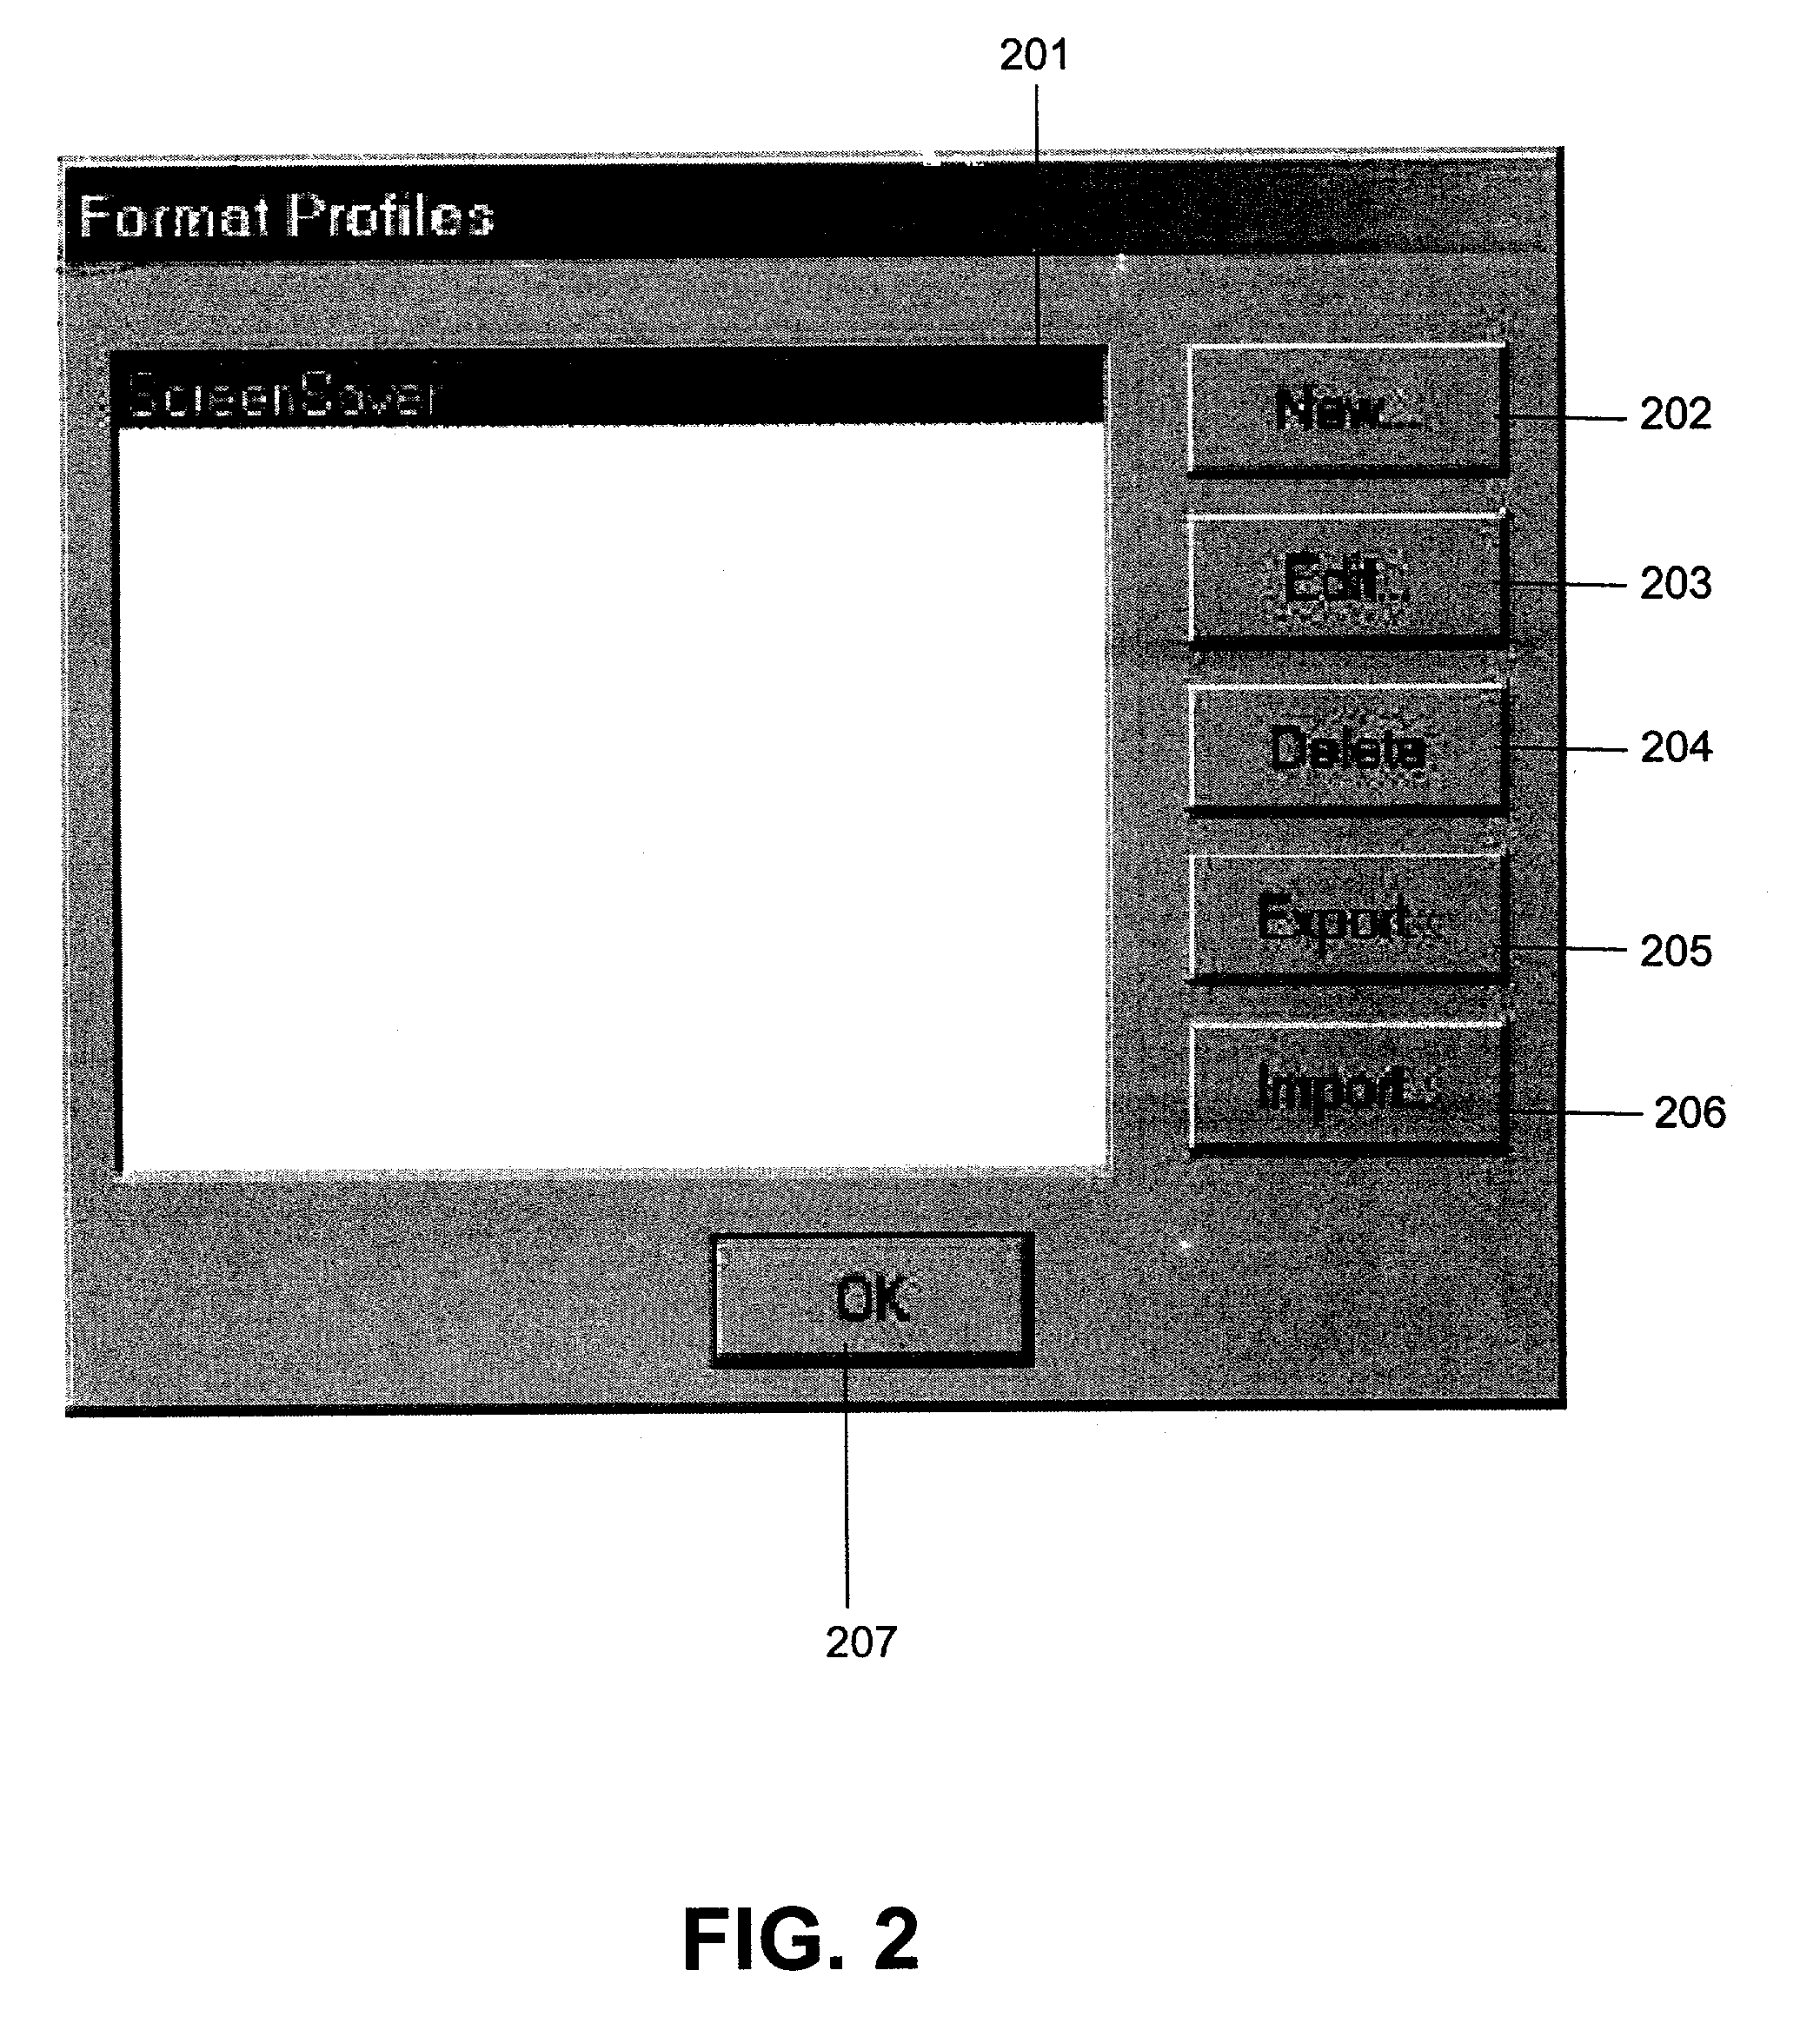 Method and system for transferring and sharing images between devices and locations